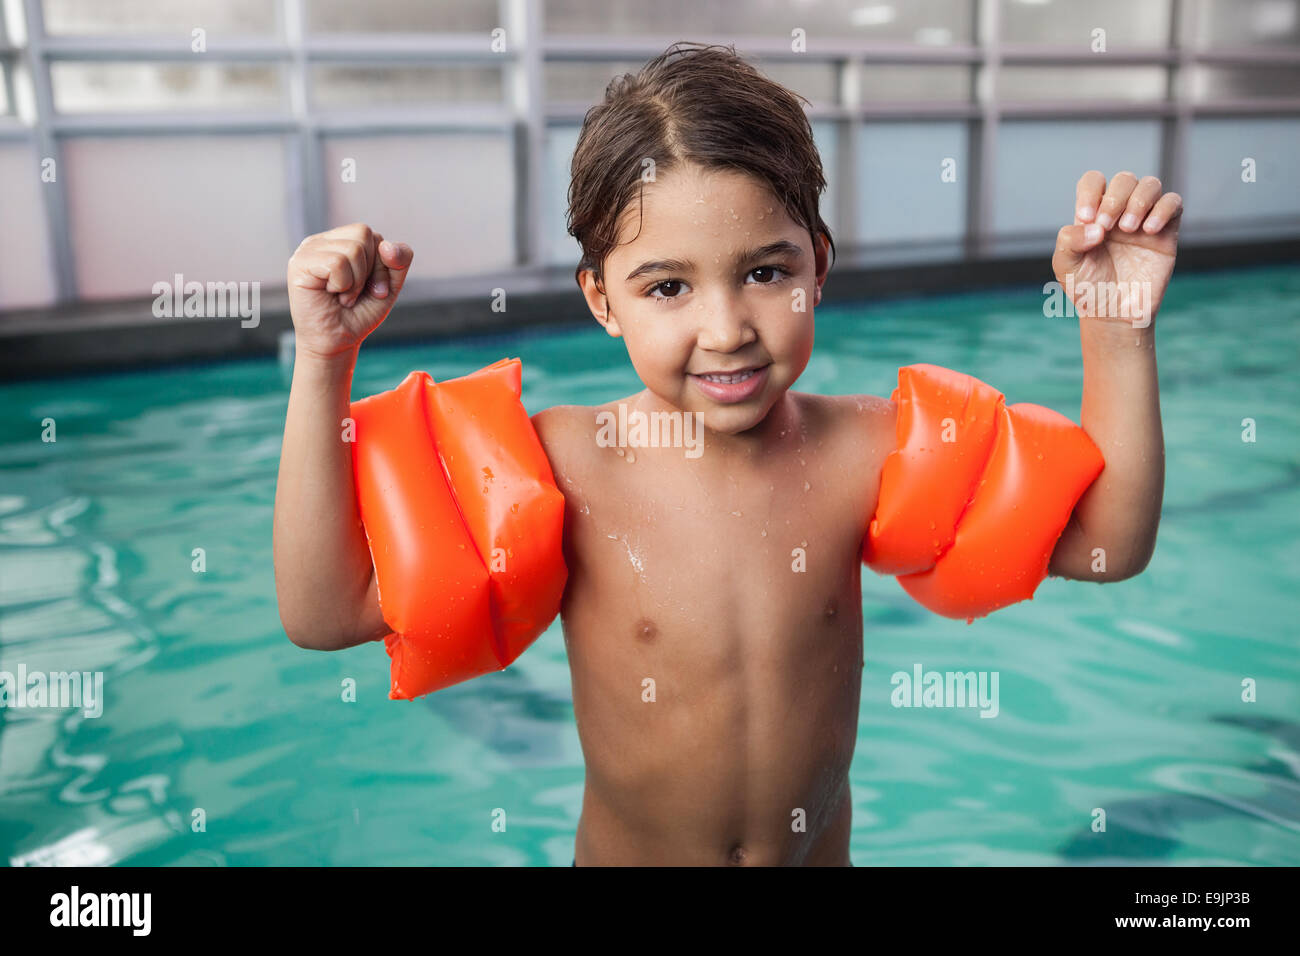 Little boy smiling at the pool Stock Photo